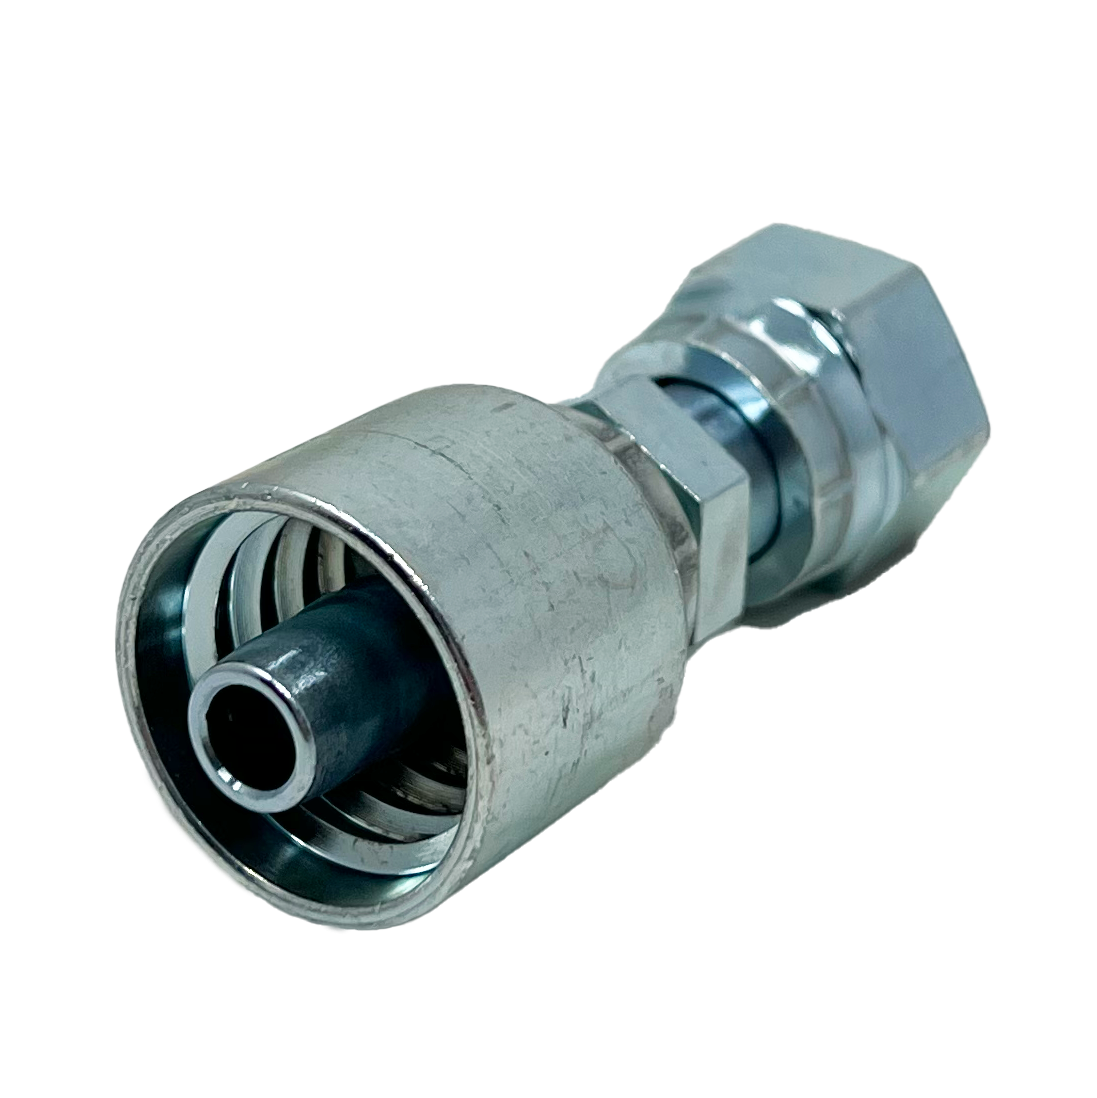 B2-OFFX-0608: Continental Hose Fitting, 0.375 (3/8") Hose ID x 13/16-16 Female ORFS, Straight Swivel Connection